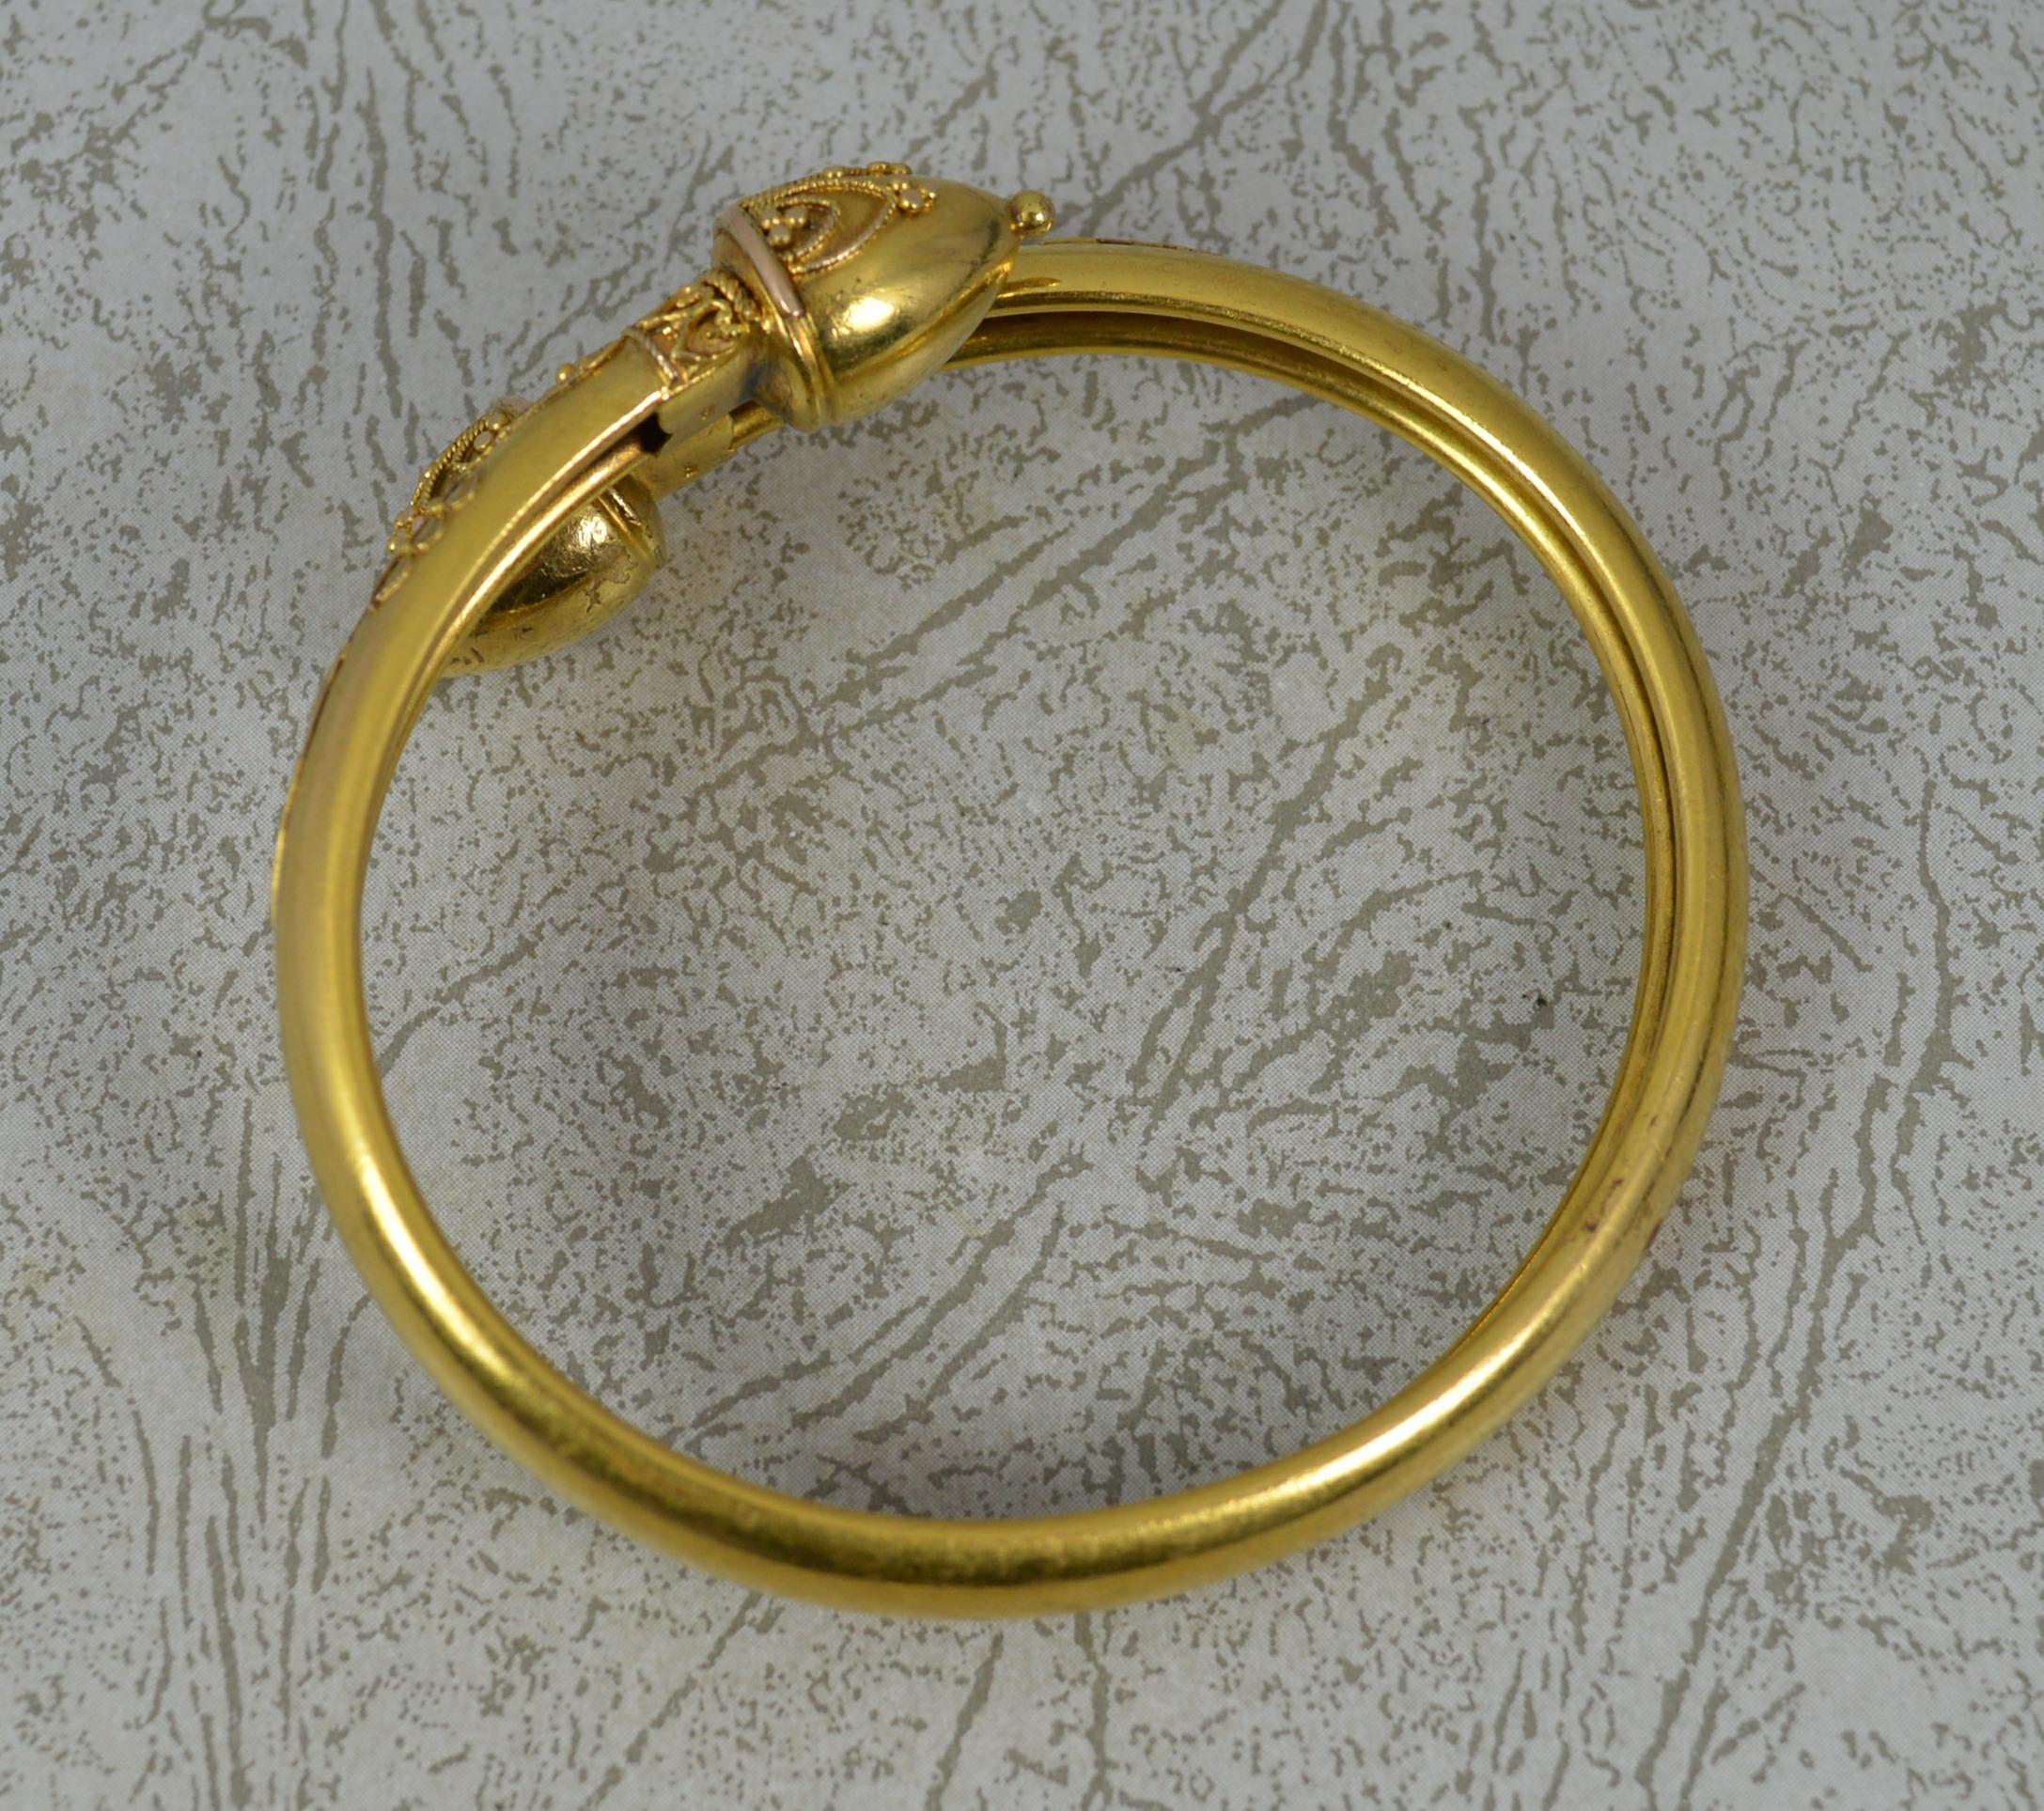 A superb Victorian period bangle. c1860-80
Modelled in a solid 15 carat yellow gold bangle throughout.
Crossover shape with a filigree design to the front and a plain, smooth band.

CONDITION ; Excellent. Crisp design. Issue free. Light wear only.